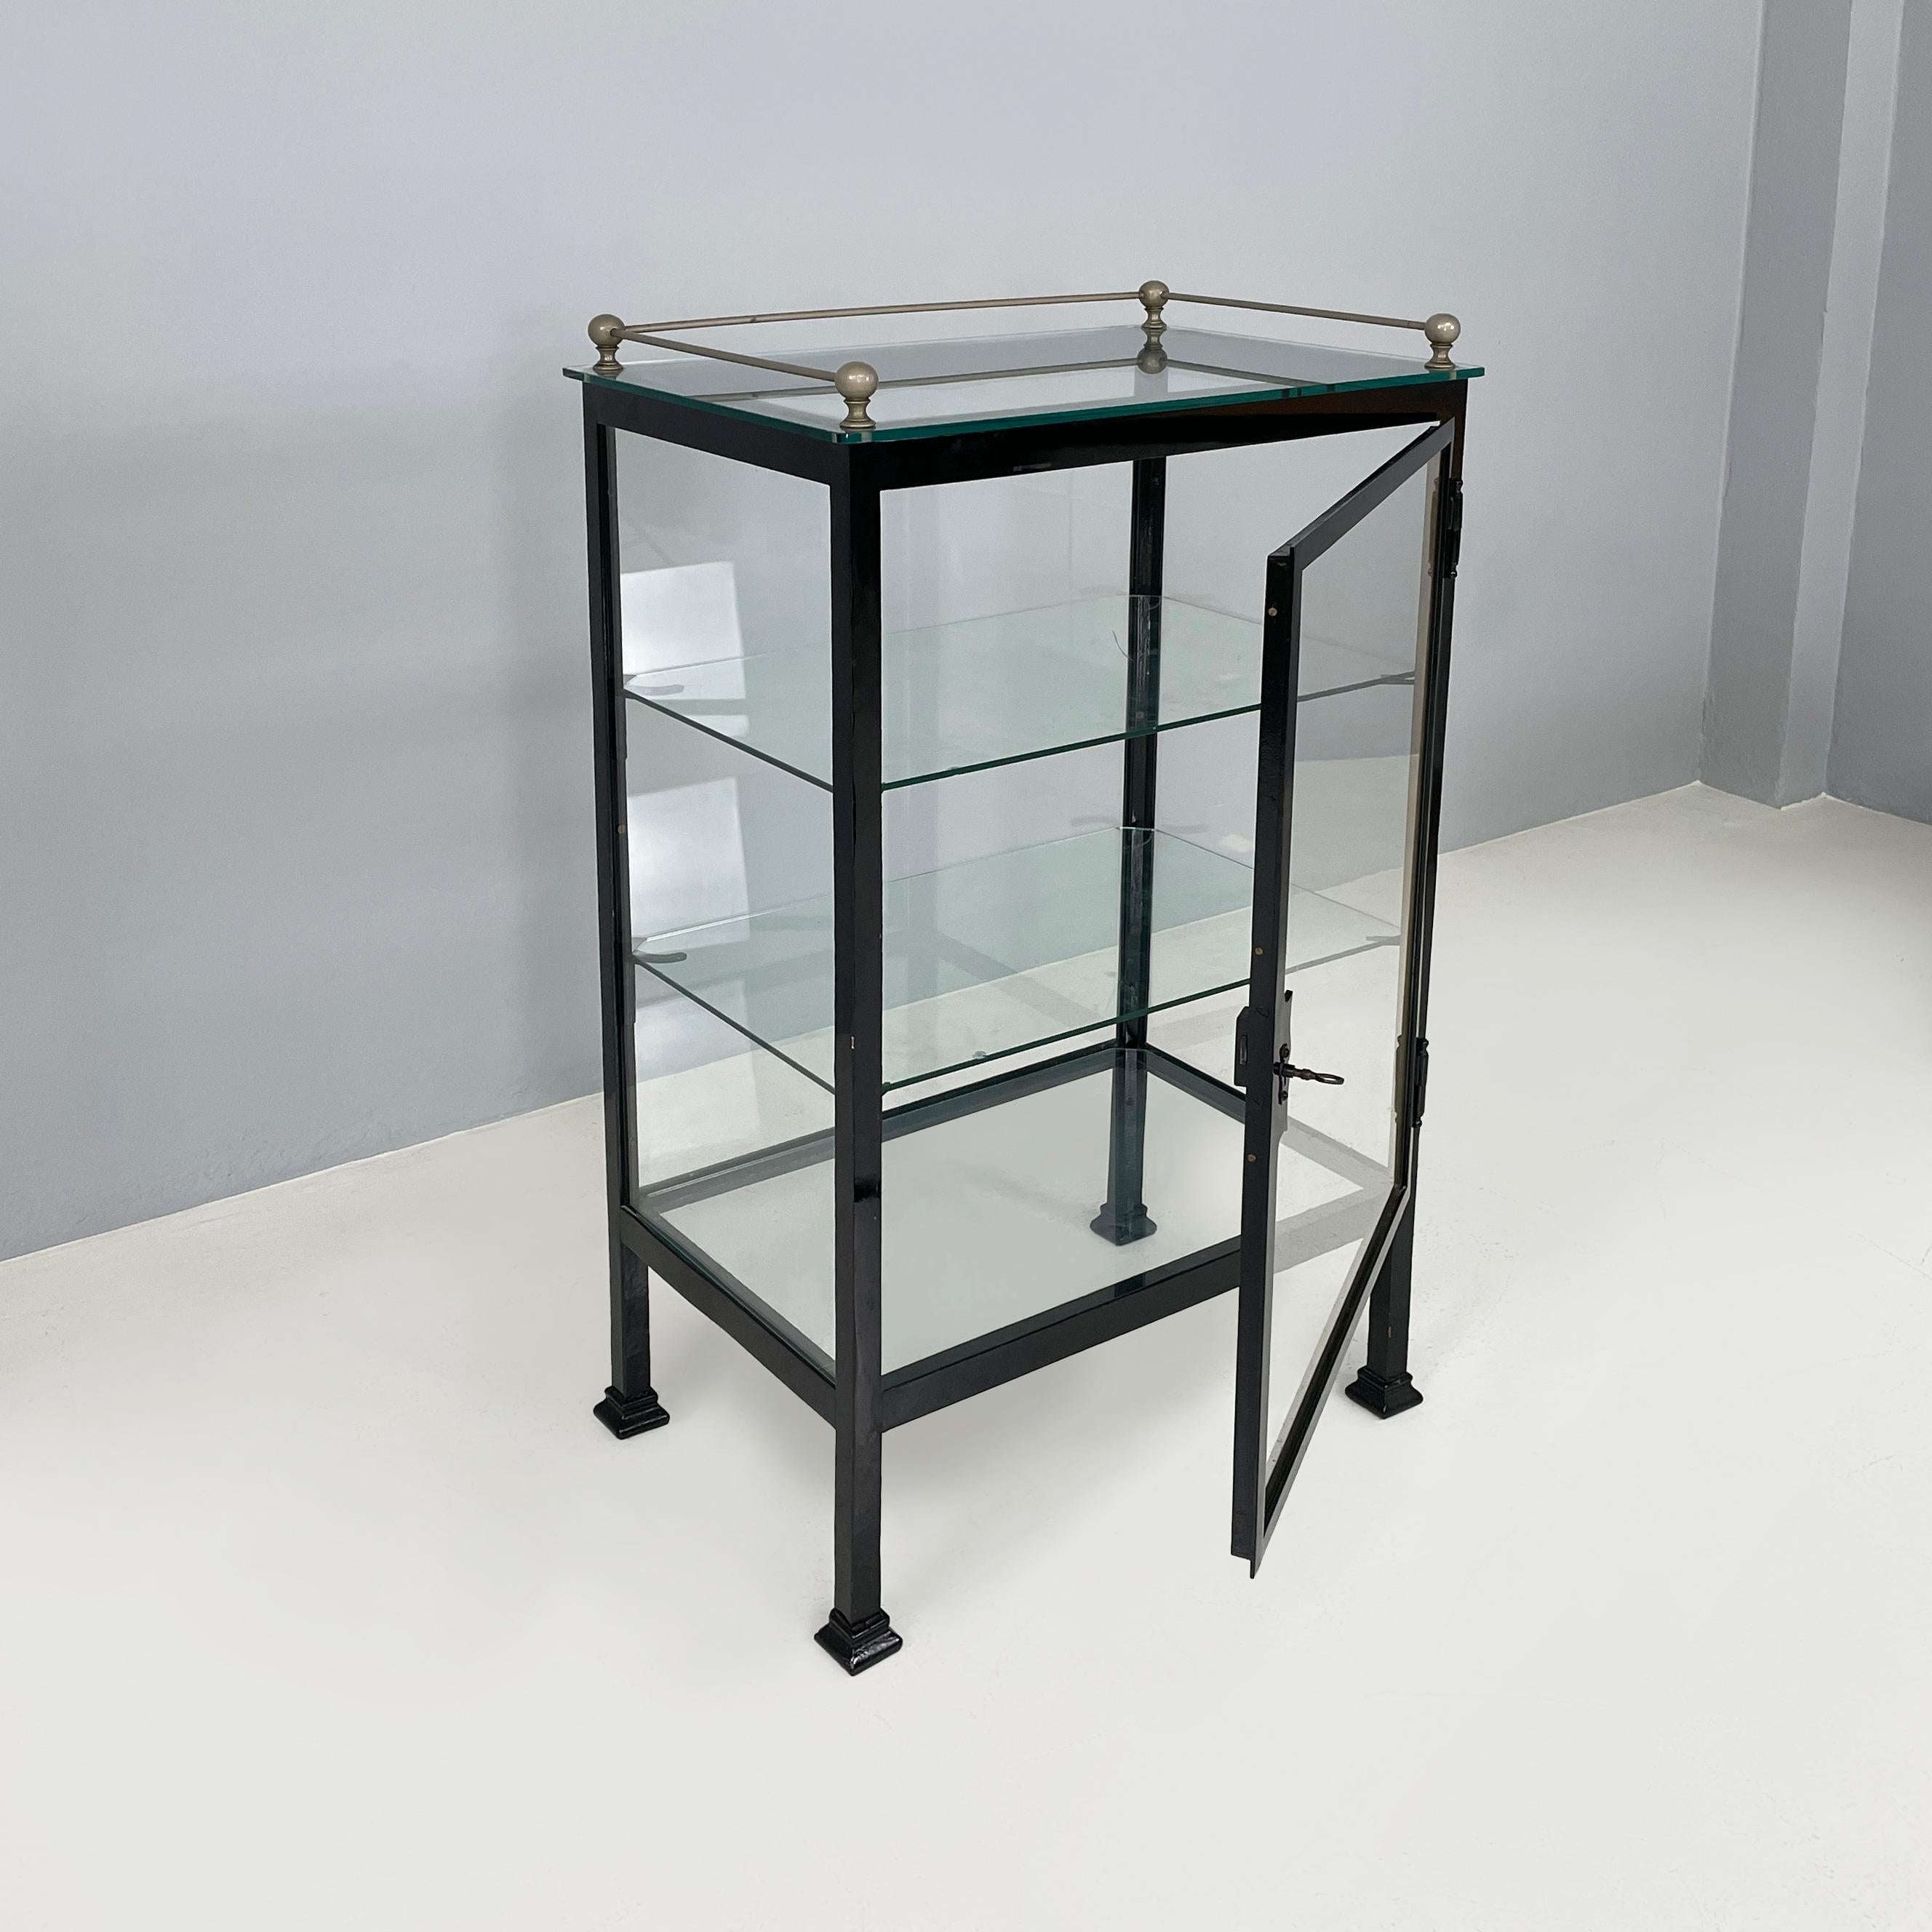 Italian antique Display cabinet in glass and black metal, early 1900s
Display case with a rectangular base made of black painted metal and glass. The frame is made of black painted metal strips, while the various sides are made of transparent glass.